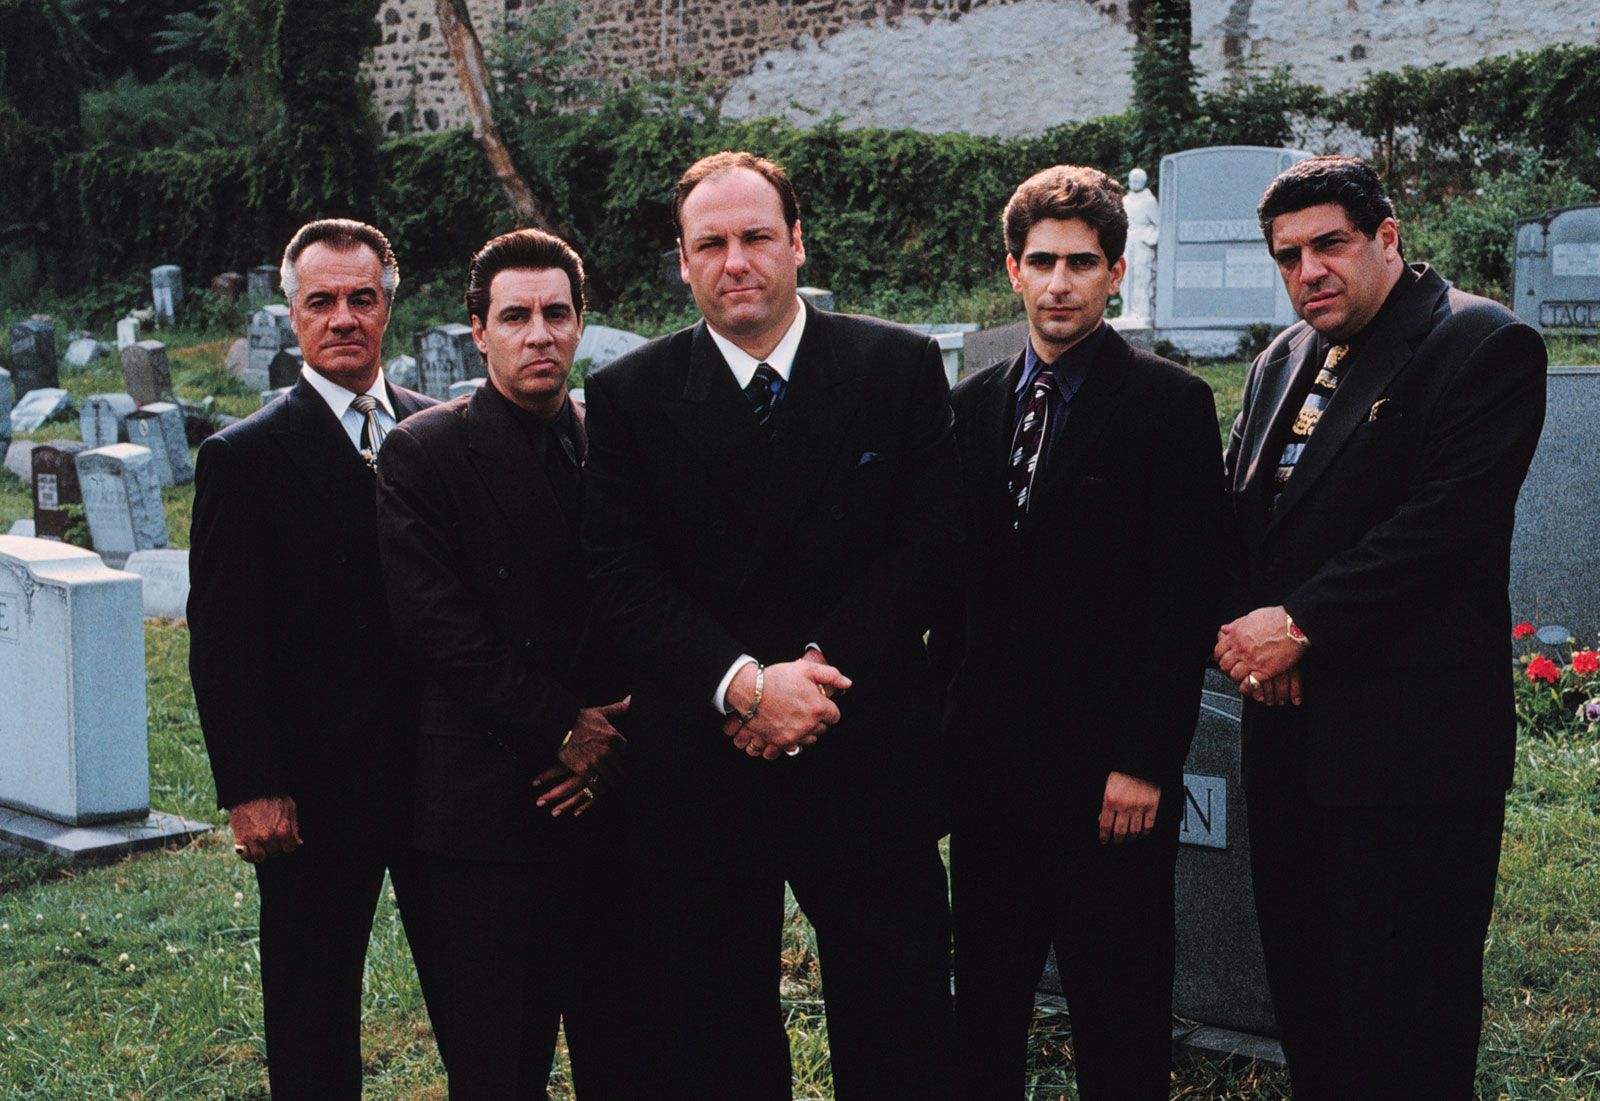  The Sopranos: 10 years since it finished.